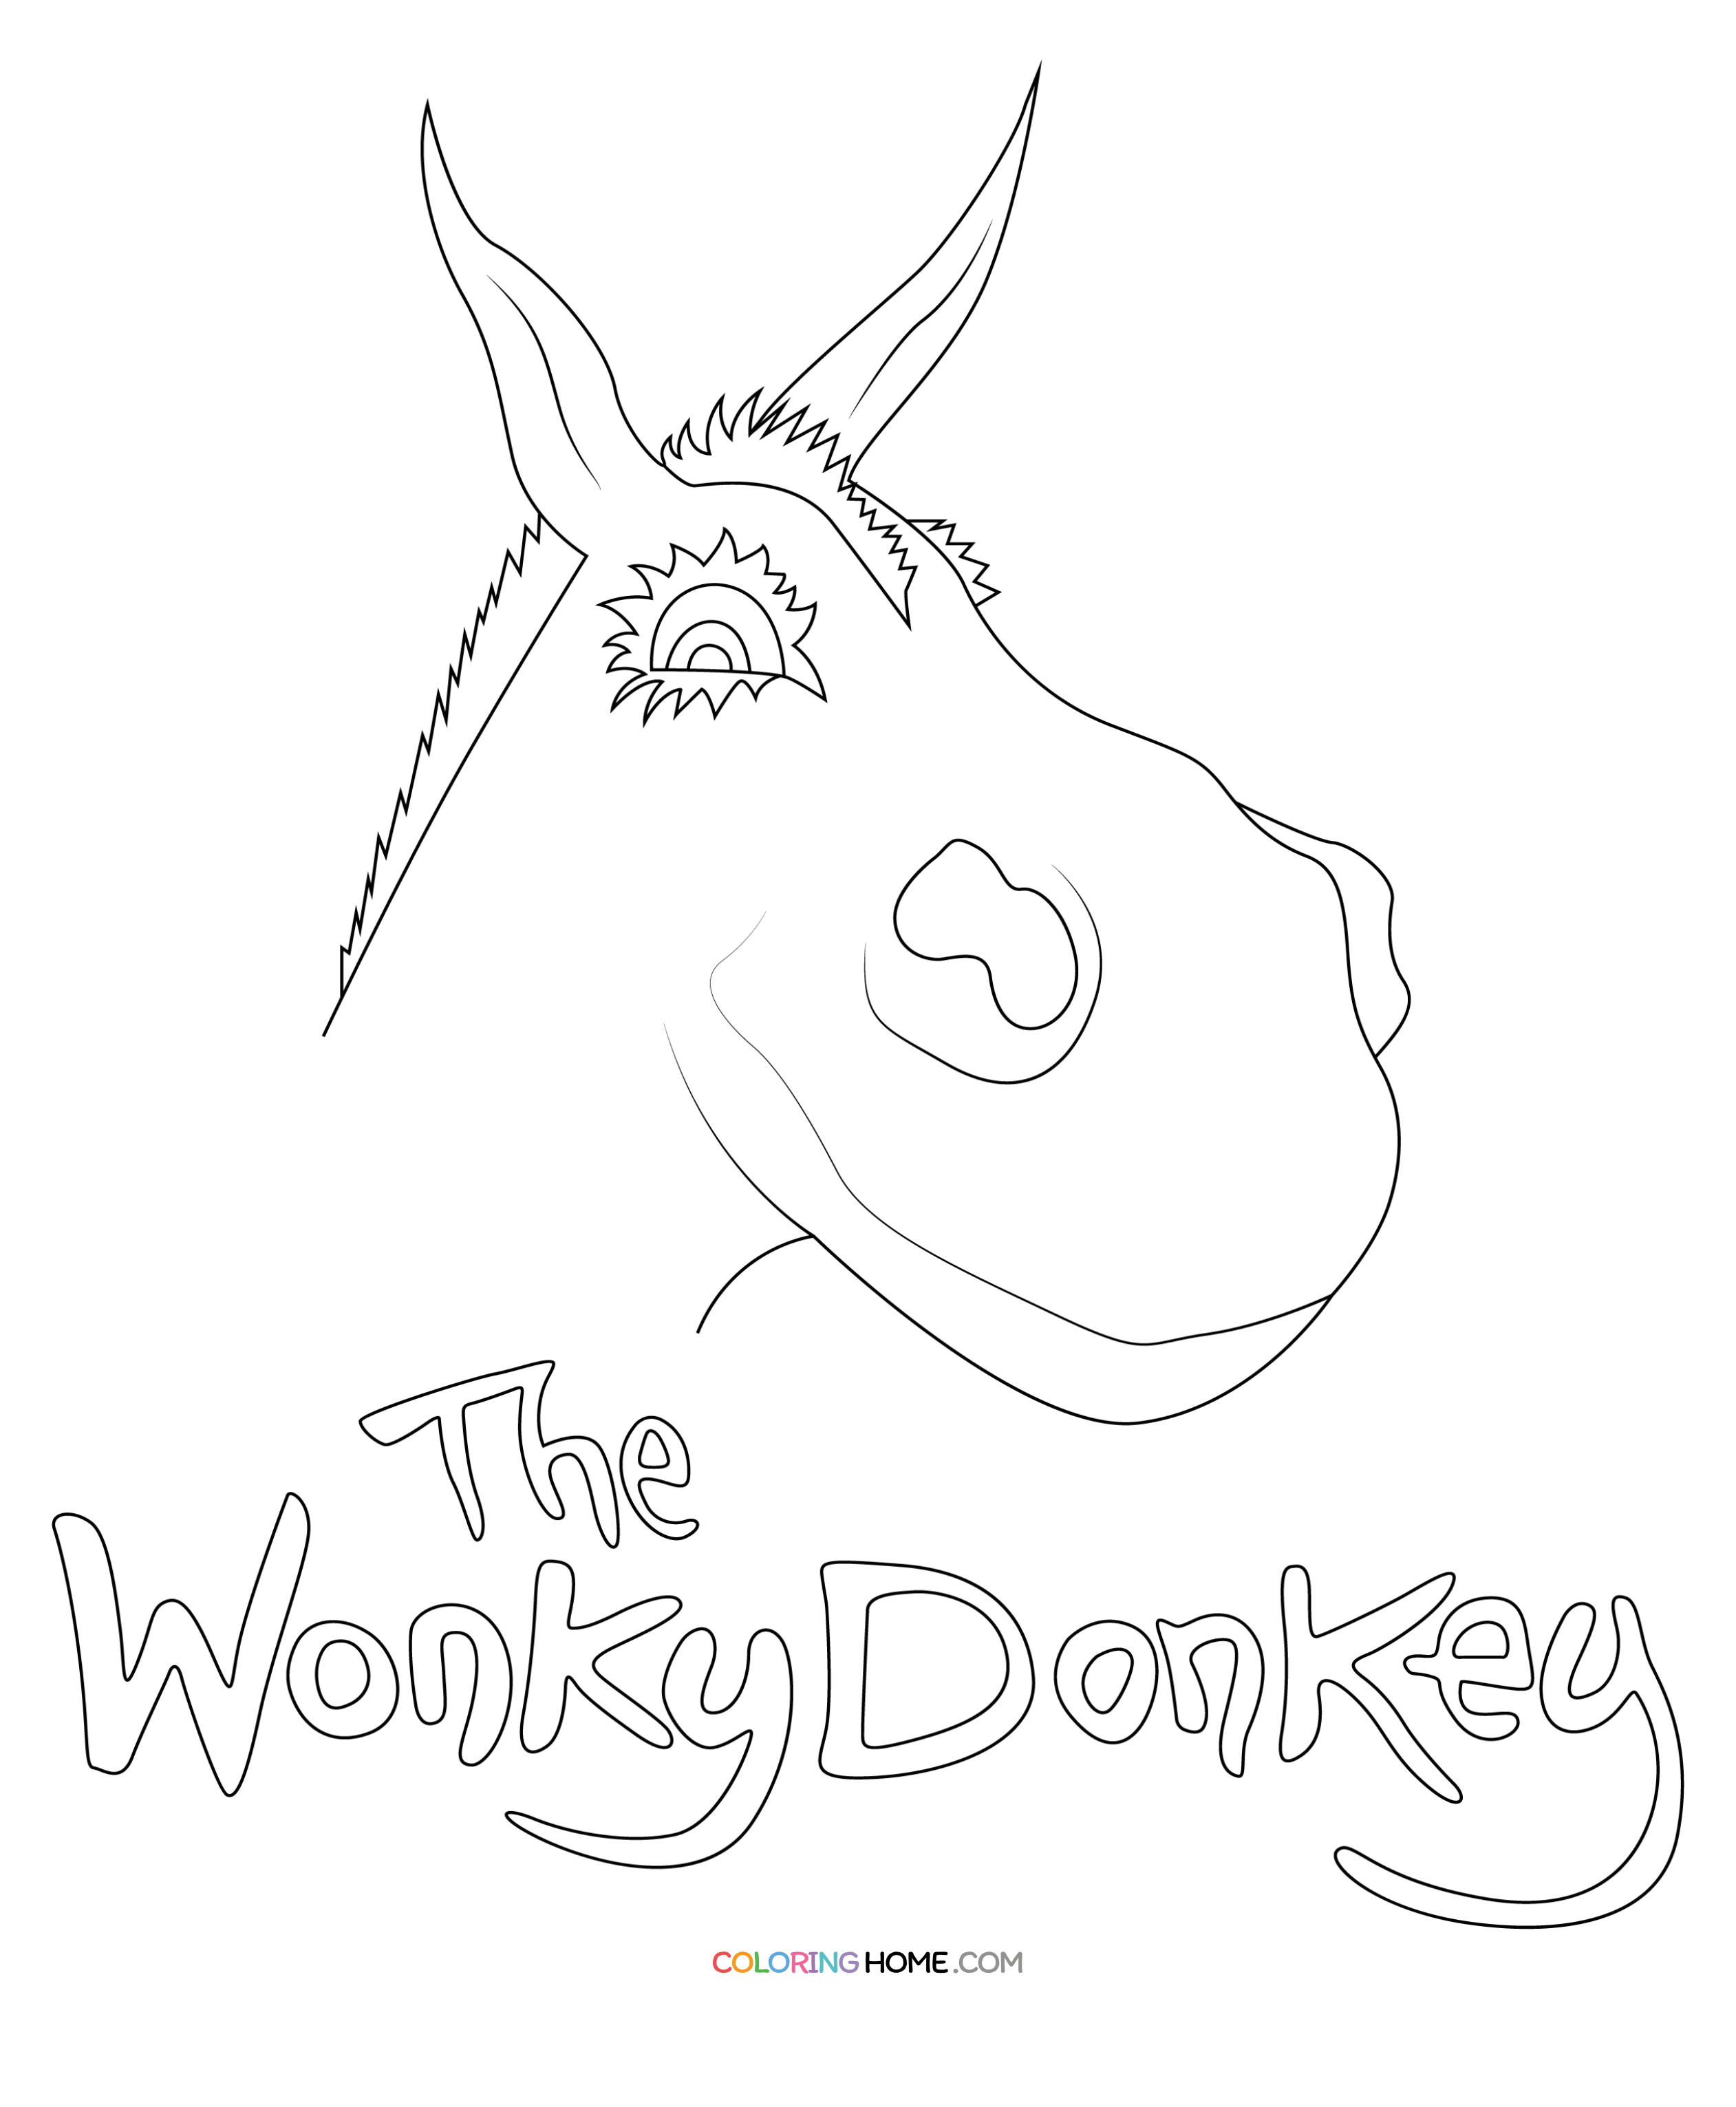 The Wonky Donkey coloring page